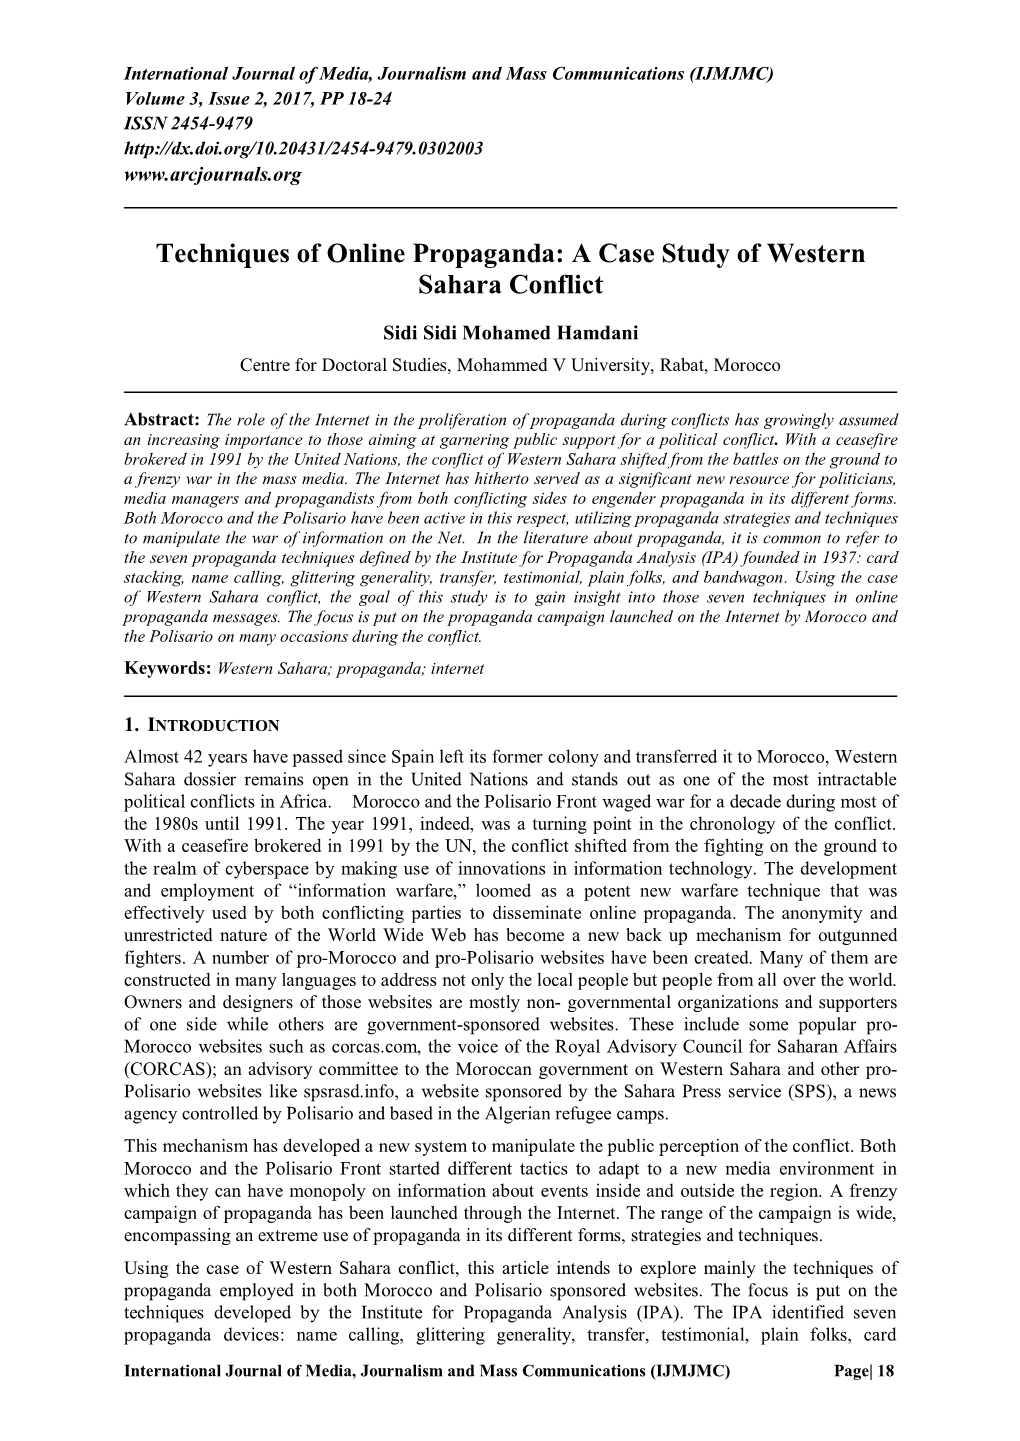 Techniques of Online Propaganda: a Case Study of Western Sahara Conflict